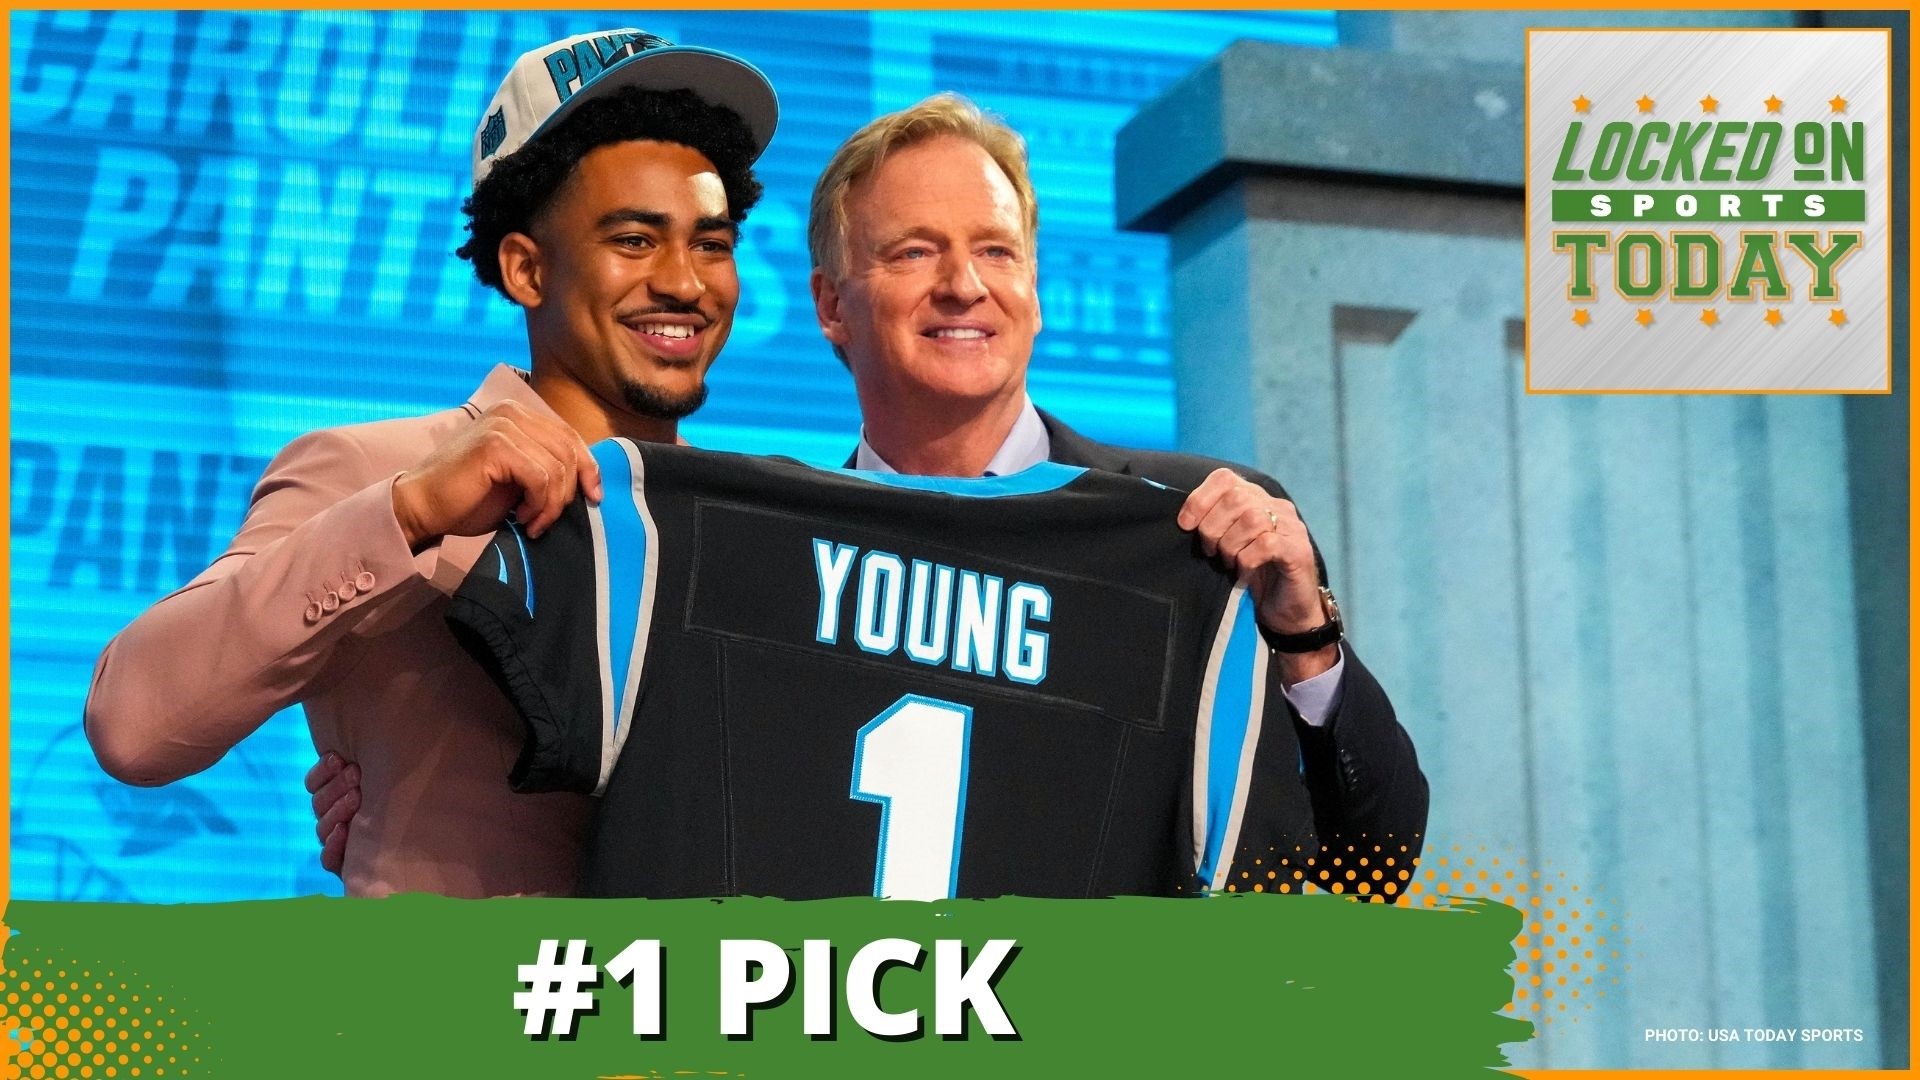 Discussing the day's top sports stories from the Panthers taking Bryce Young as the No. 1 pick in the NFL draft to a risky pick for the Colts early on.